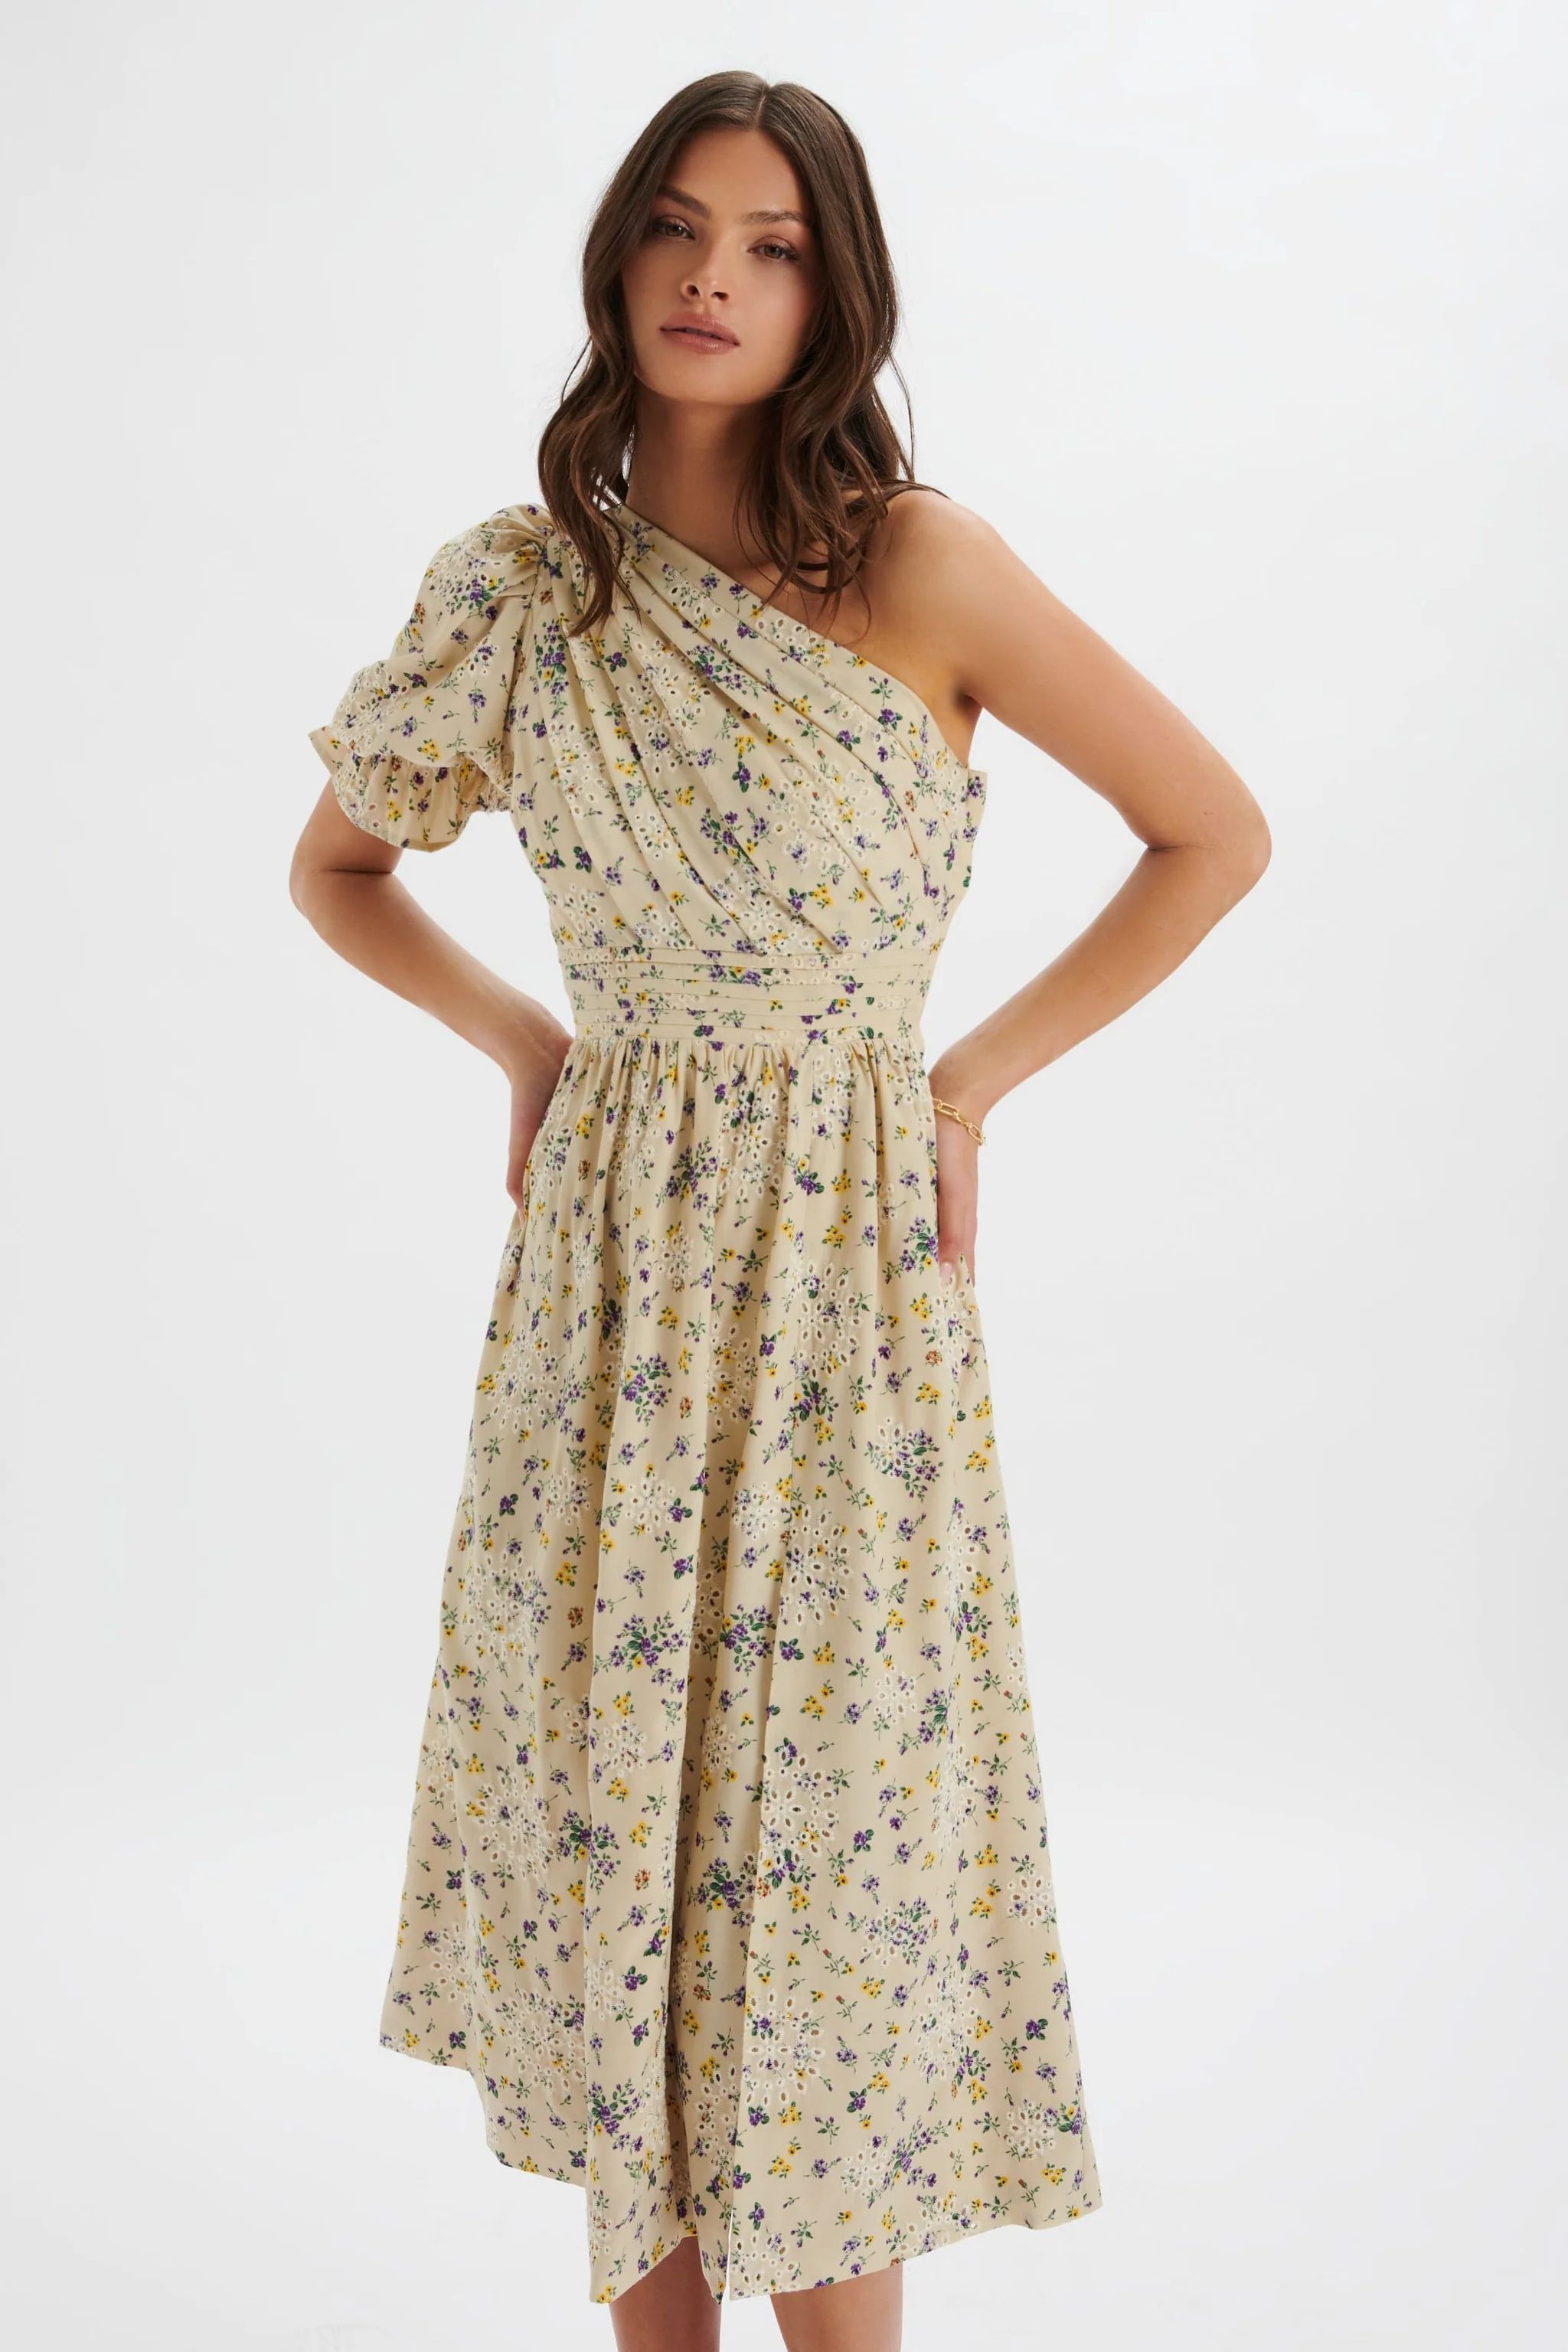 POLLY One Shoulder Puff Sleeve Midi Dress in Floral Broidery | Lavish Alice Retail Ltd